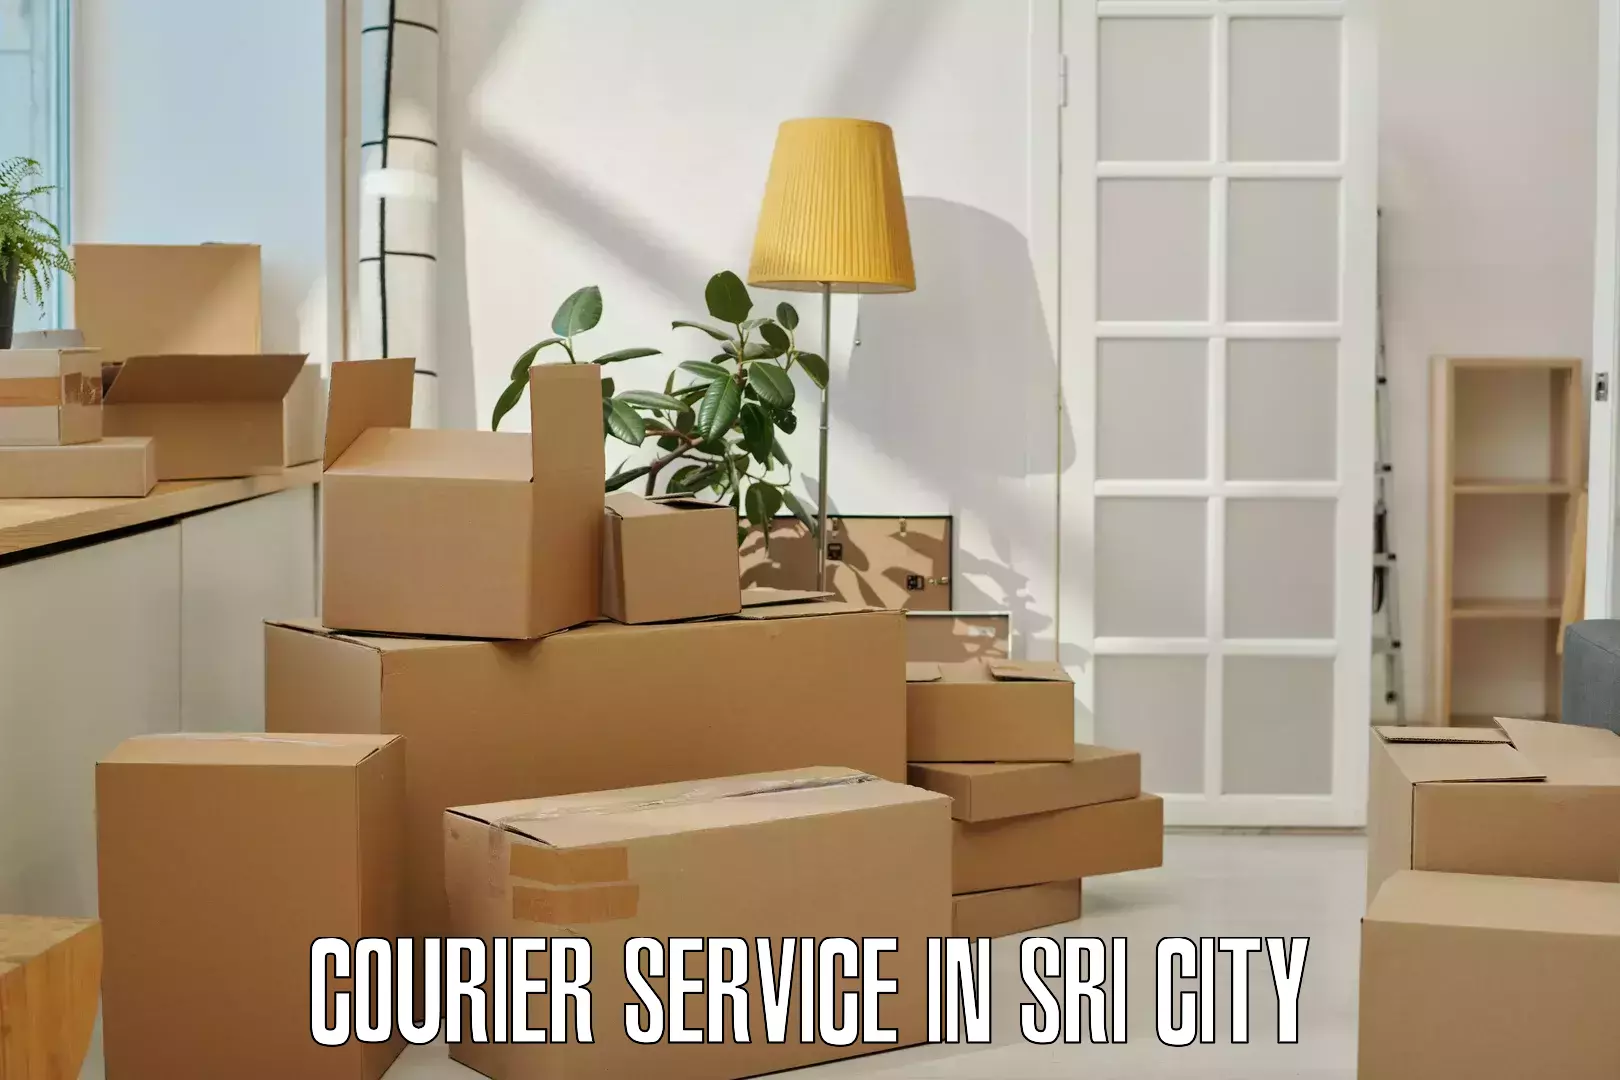 Customer-oriented courier services in Sri City